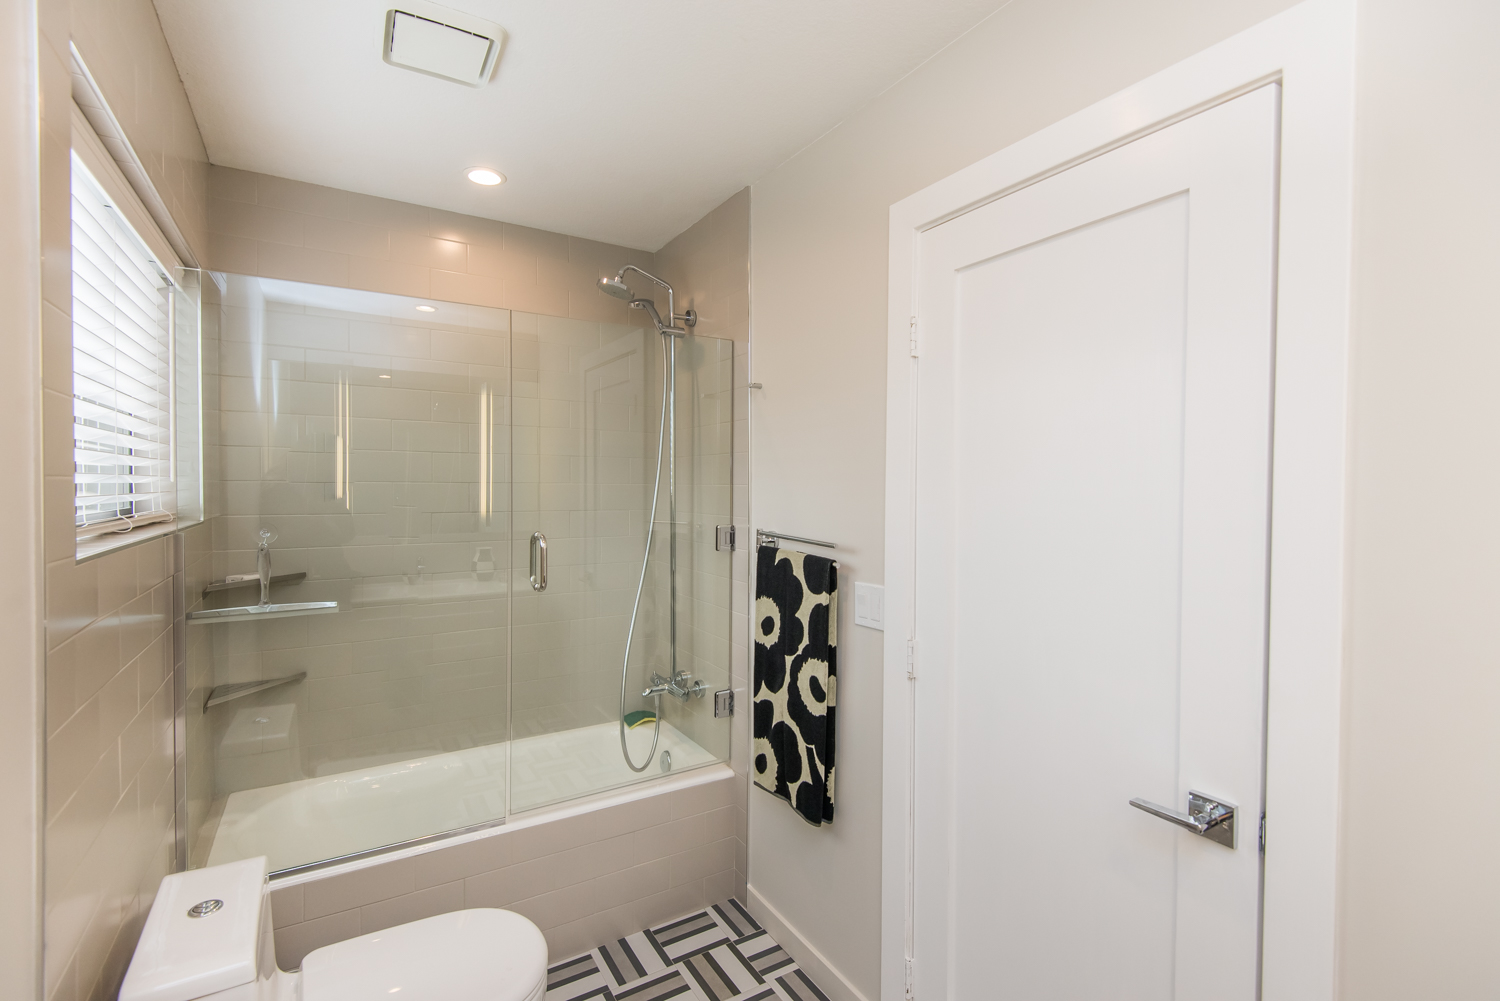 Tub-shower with glass enclosure completes the master bath.